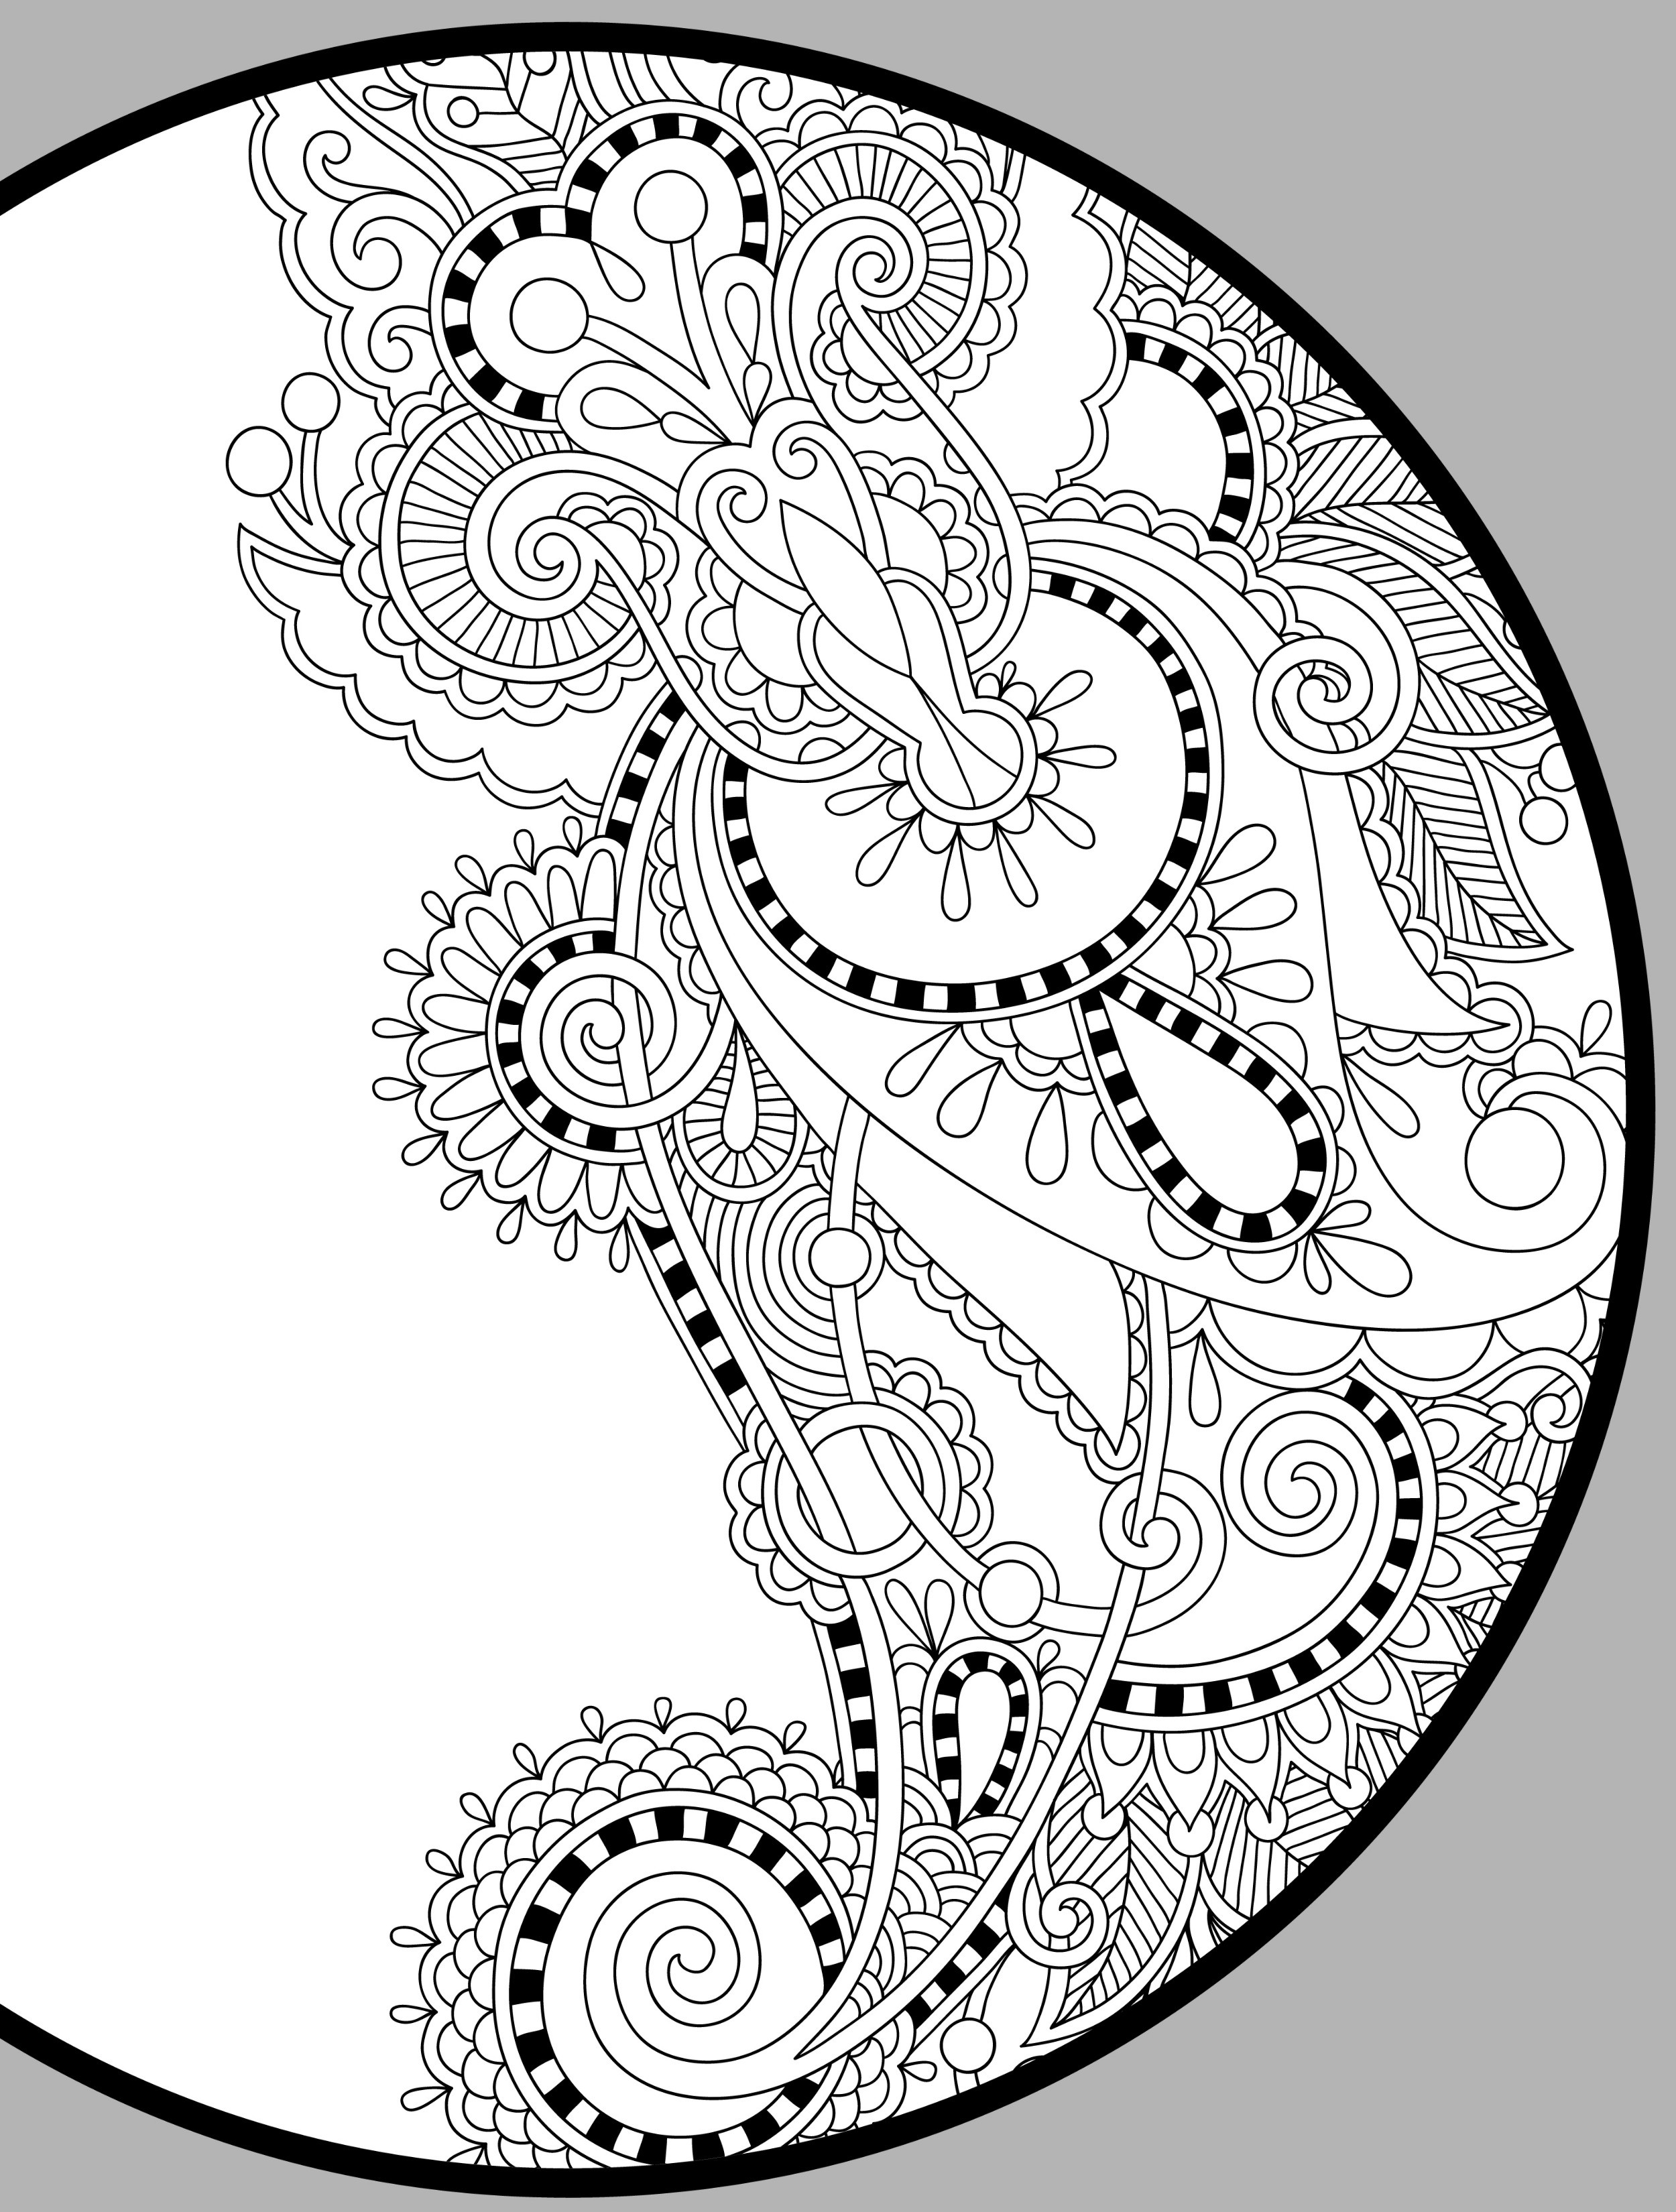 Free Downloadable Coloring Pages For Adults
 Free Printable Coloring Pages For Adults Pdf The Color Panda